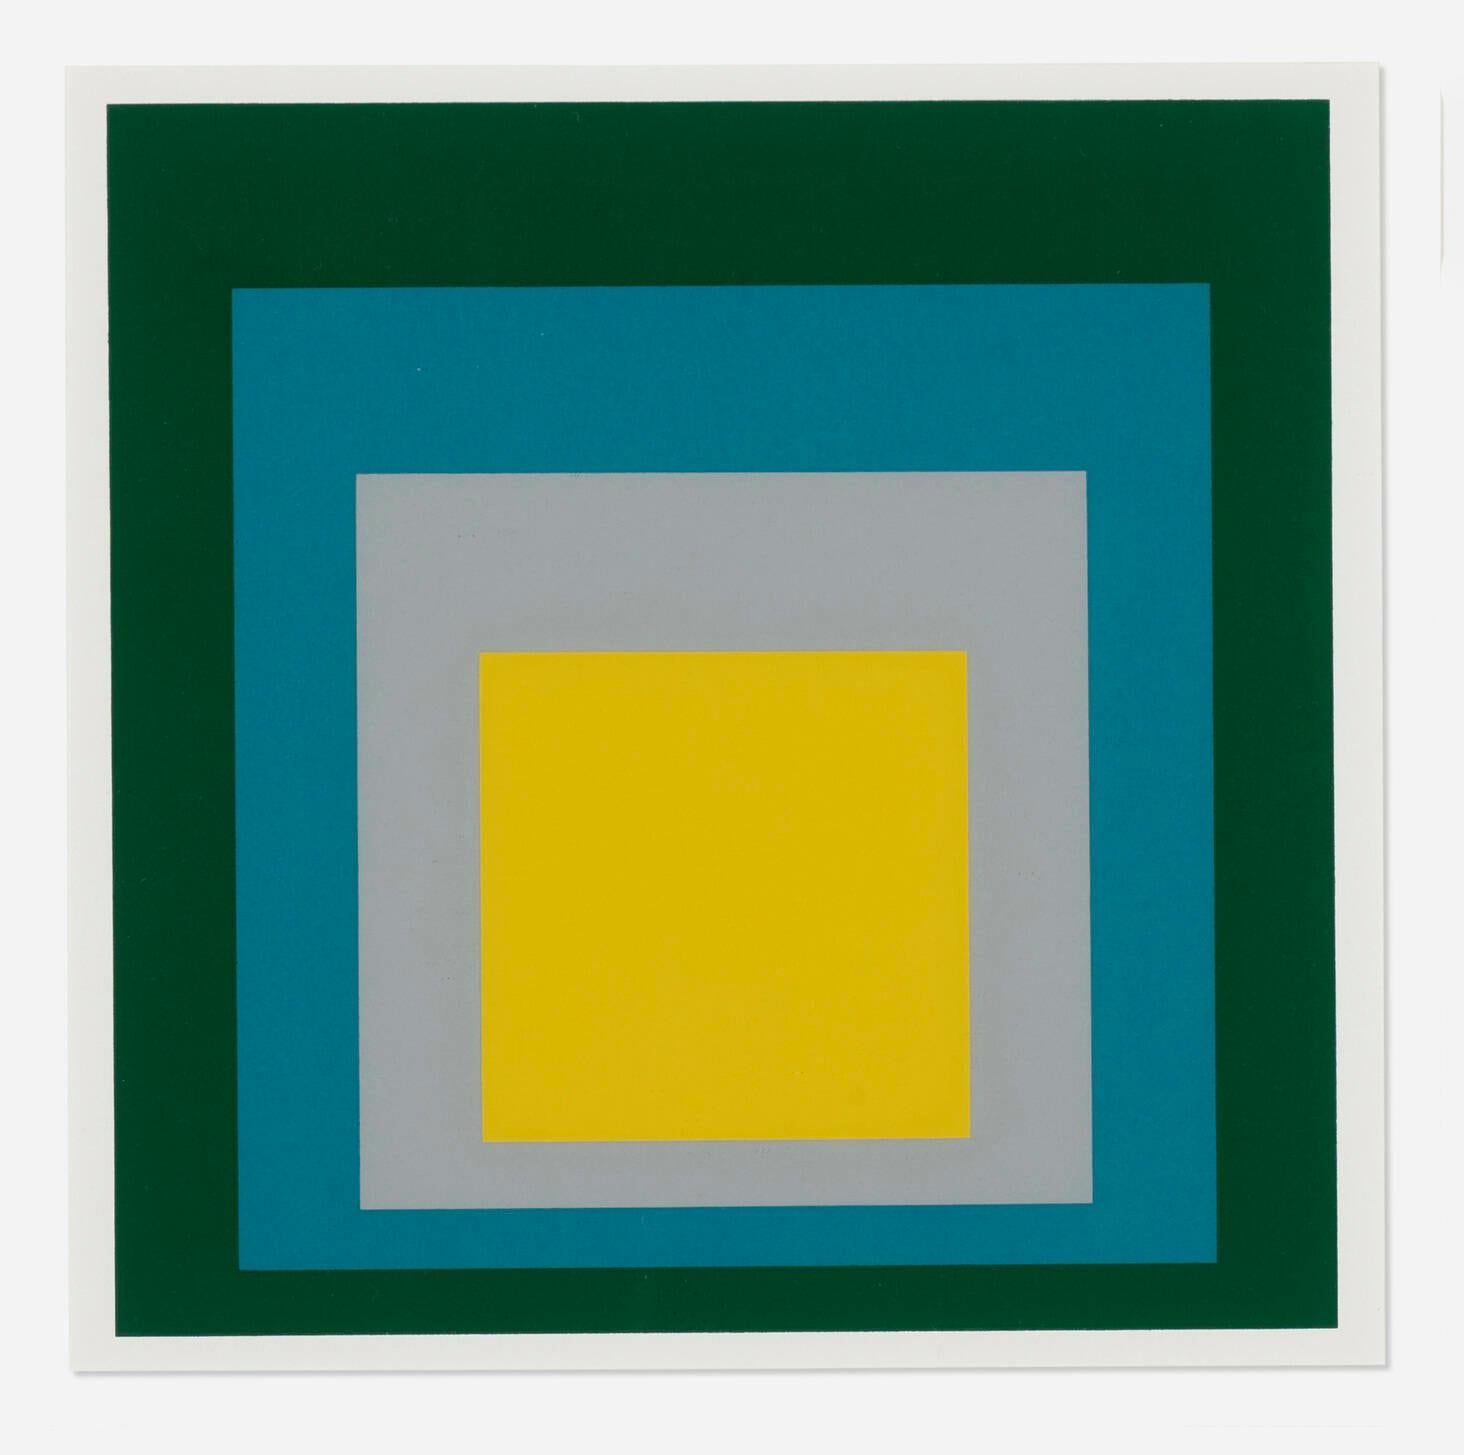 Artist: Josef Albers, German (1888 - 1976)
Title: "Homage to the Square : Park 1967" From New Paintings NY First edition
Year: 1968
Medium: Screenprint
Edition Size: Unknoun, presumed small edition
Image Size: 7.5 x 7.5 Inches
over all with borders: